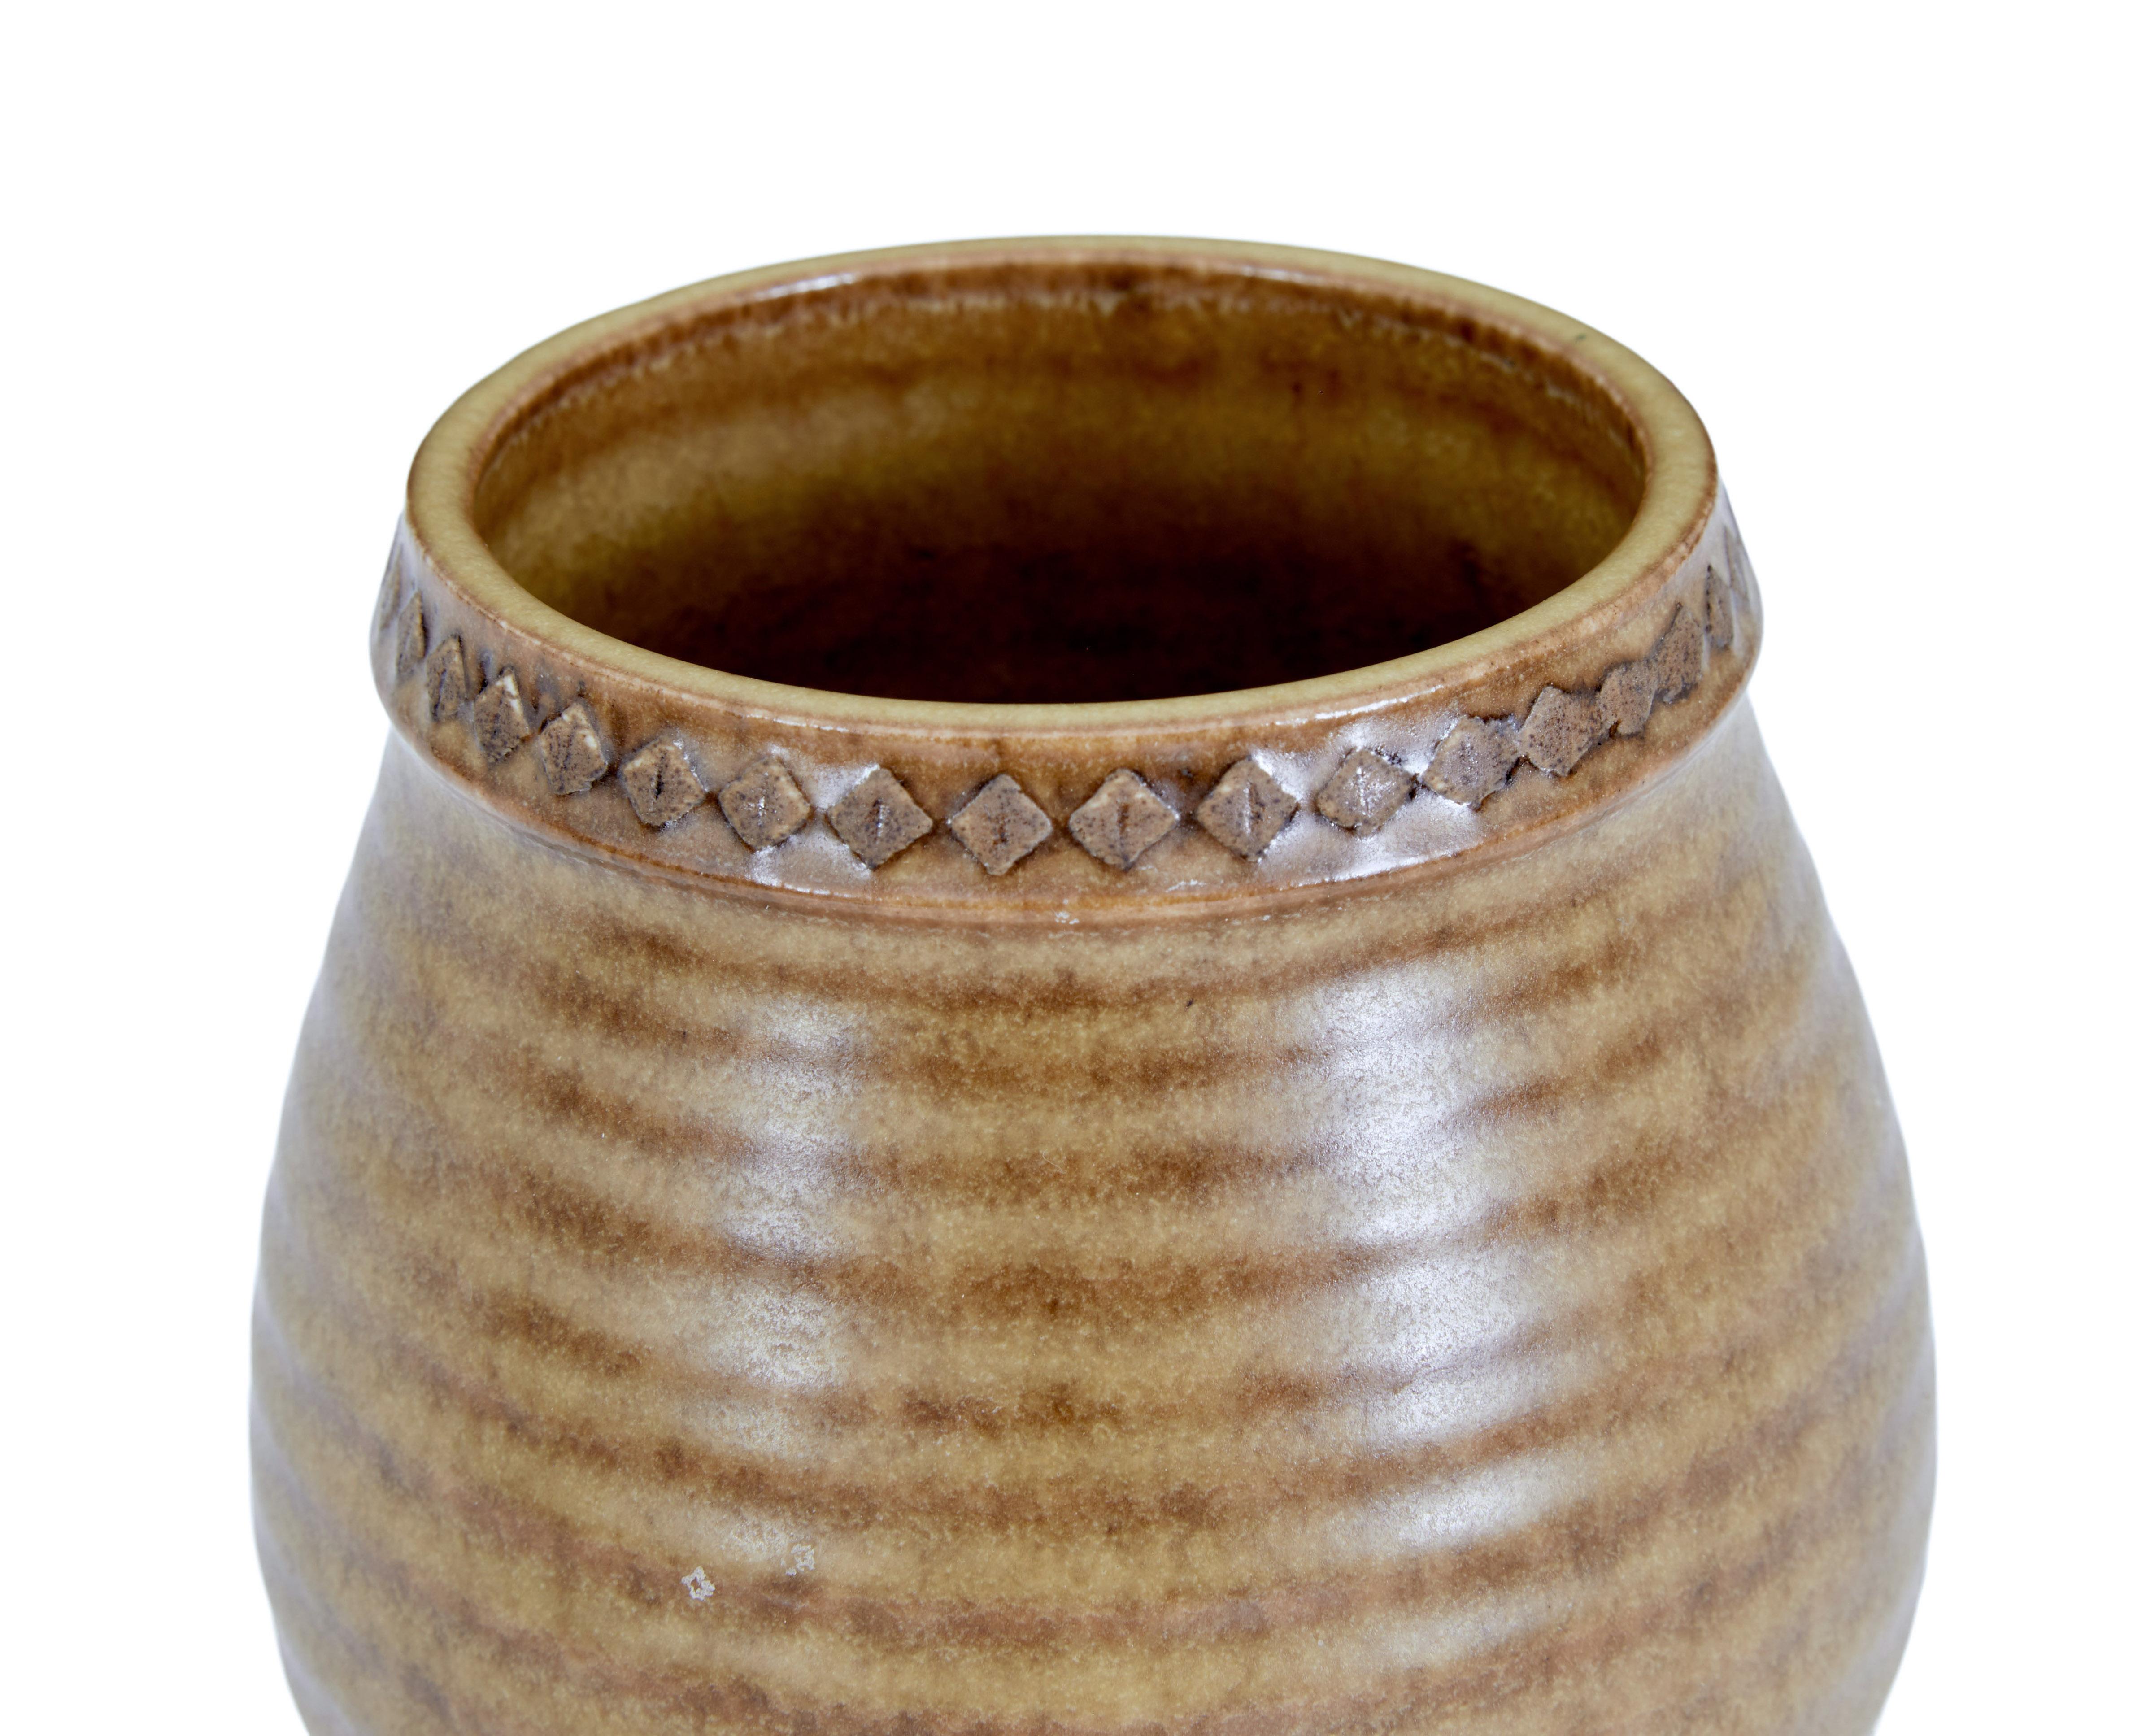 Mid-20th century ceramic pot by Gunnar Nylund of Rorstrand, circa 1950.

Fine quality small pot or even a occasional goblet, designed by Gunnar Nylund. Glazed and in very good condition. Hand signed on the underside.